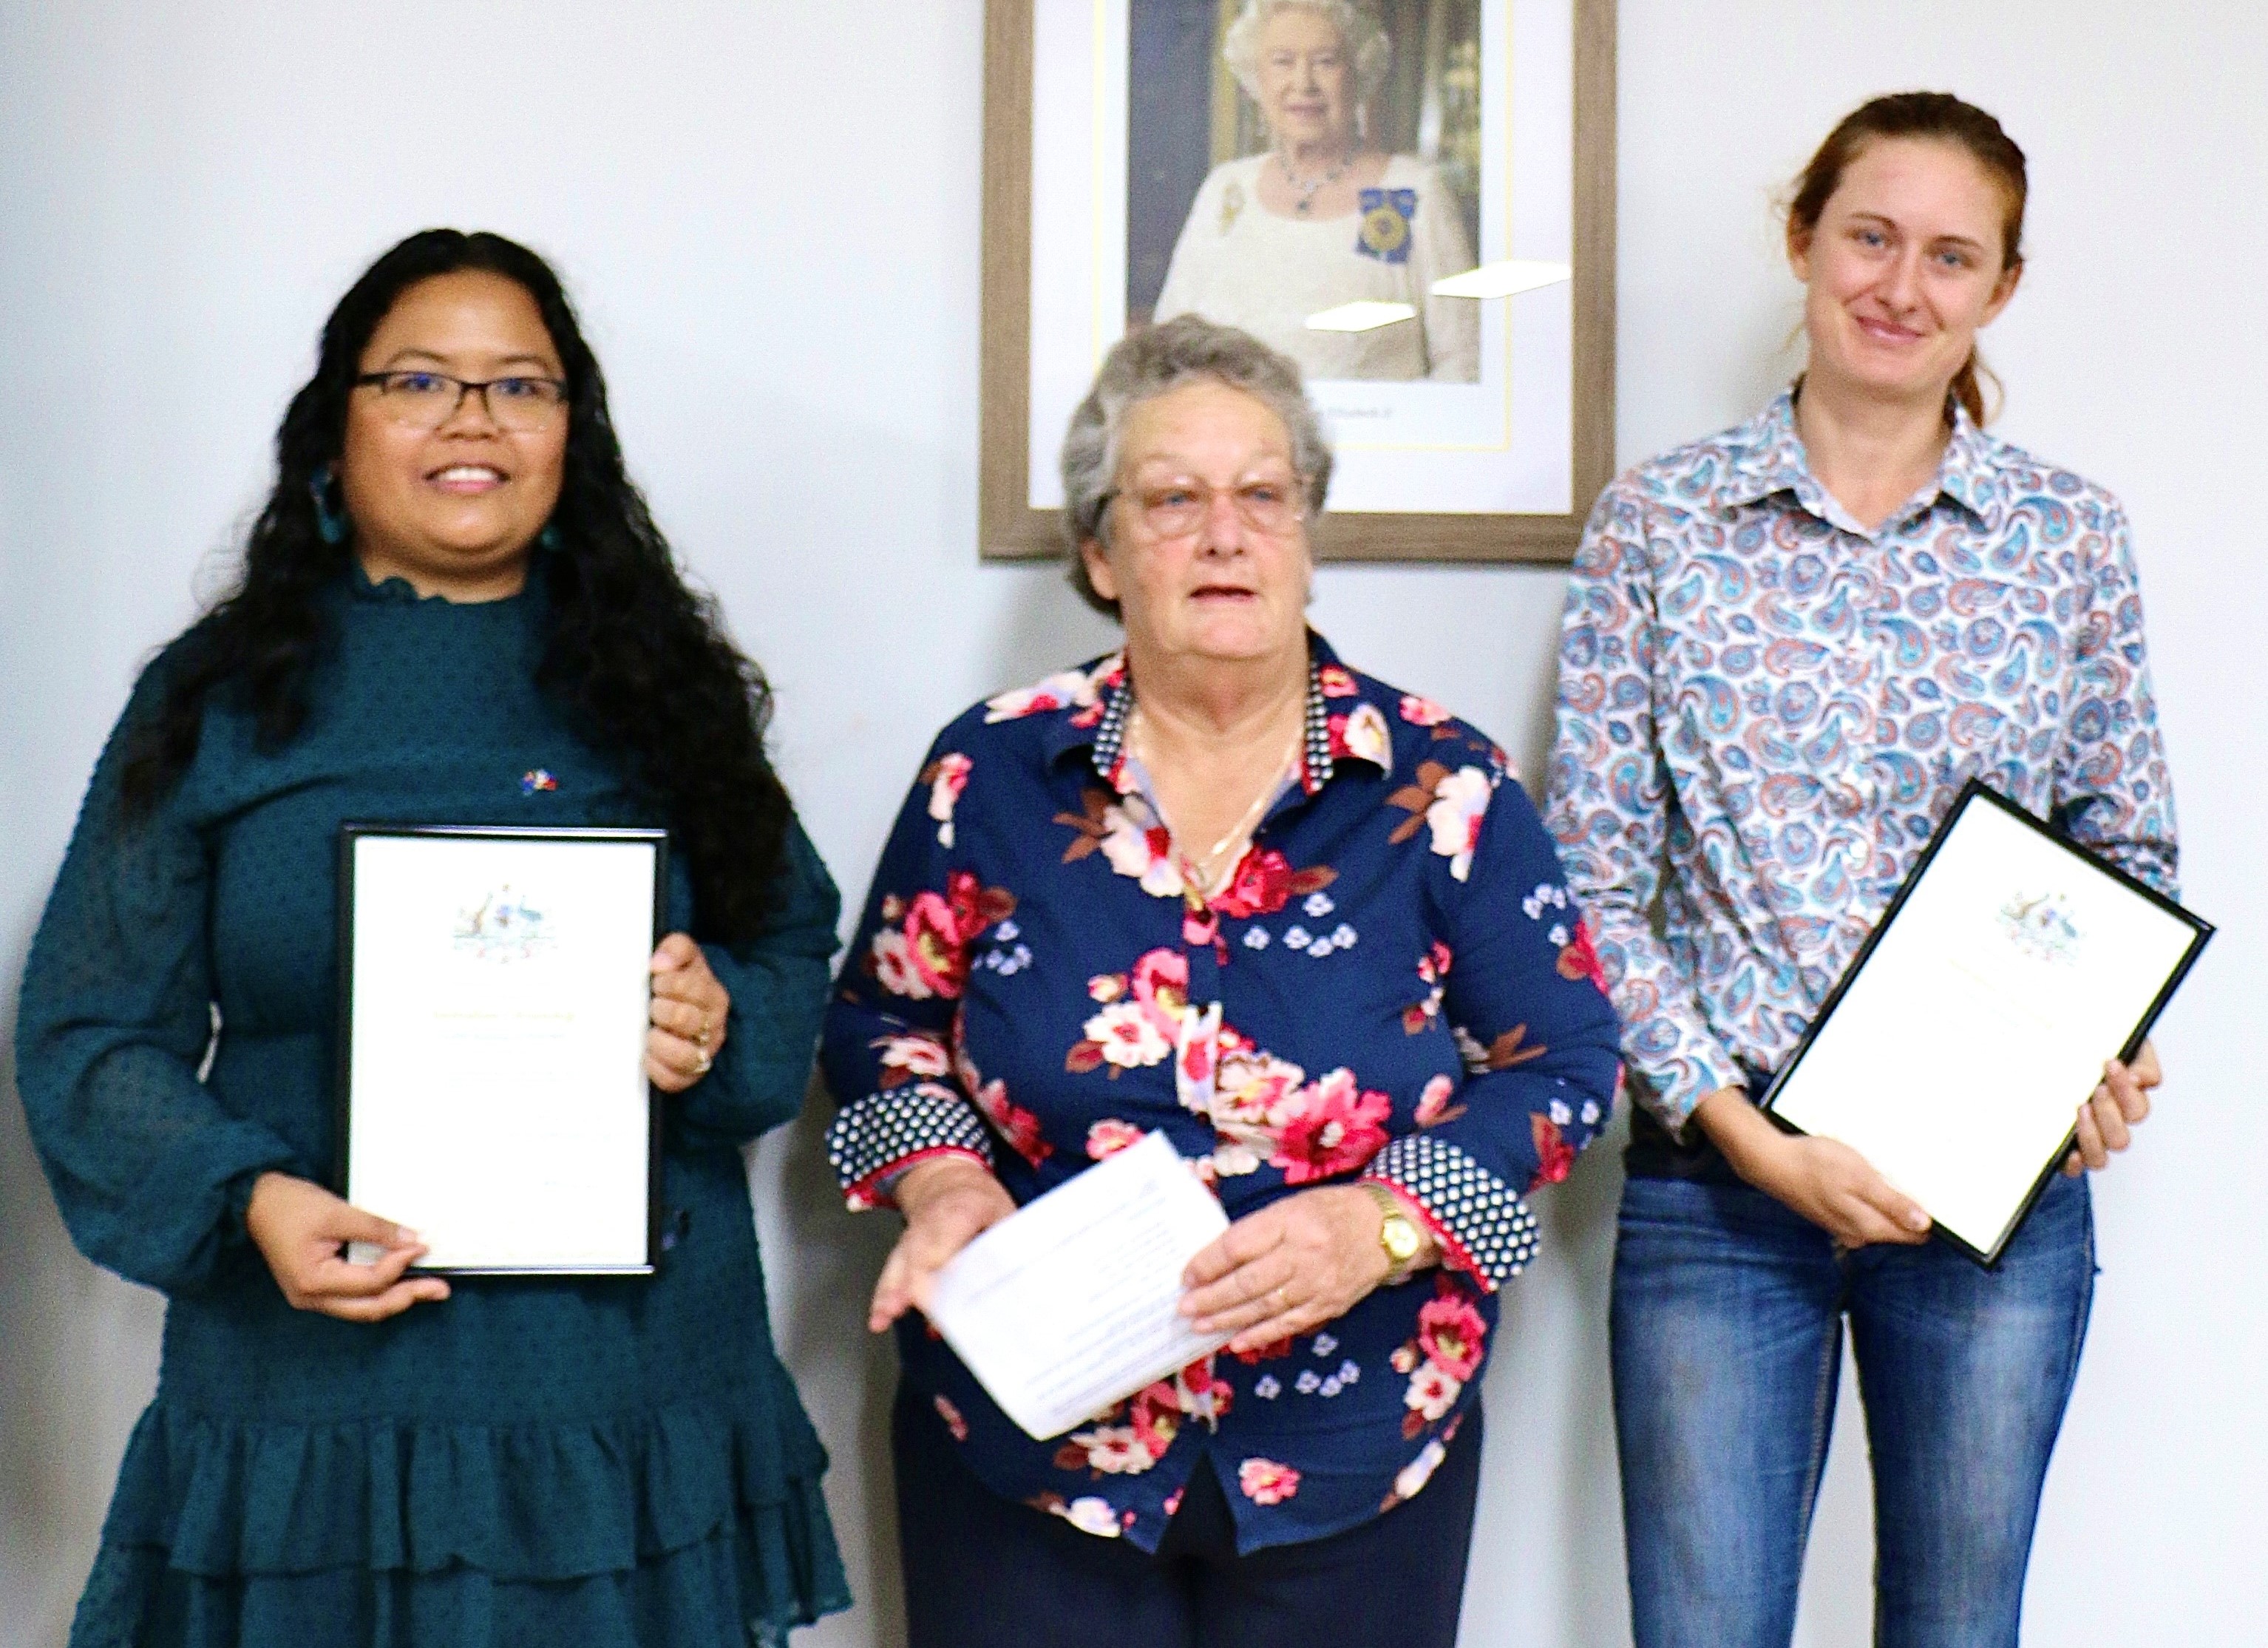 The Flinders Shire welcomed two new citizens at an Australian citizenship ceremony on Saturday (17 September), as part of Australian Citizenship Day celebrations.